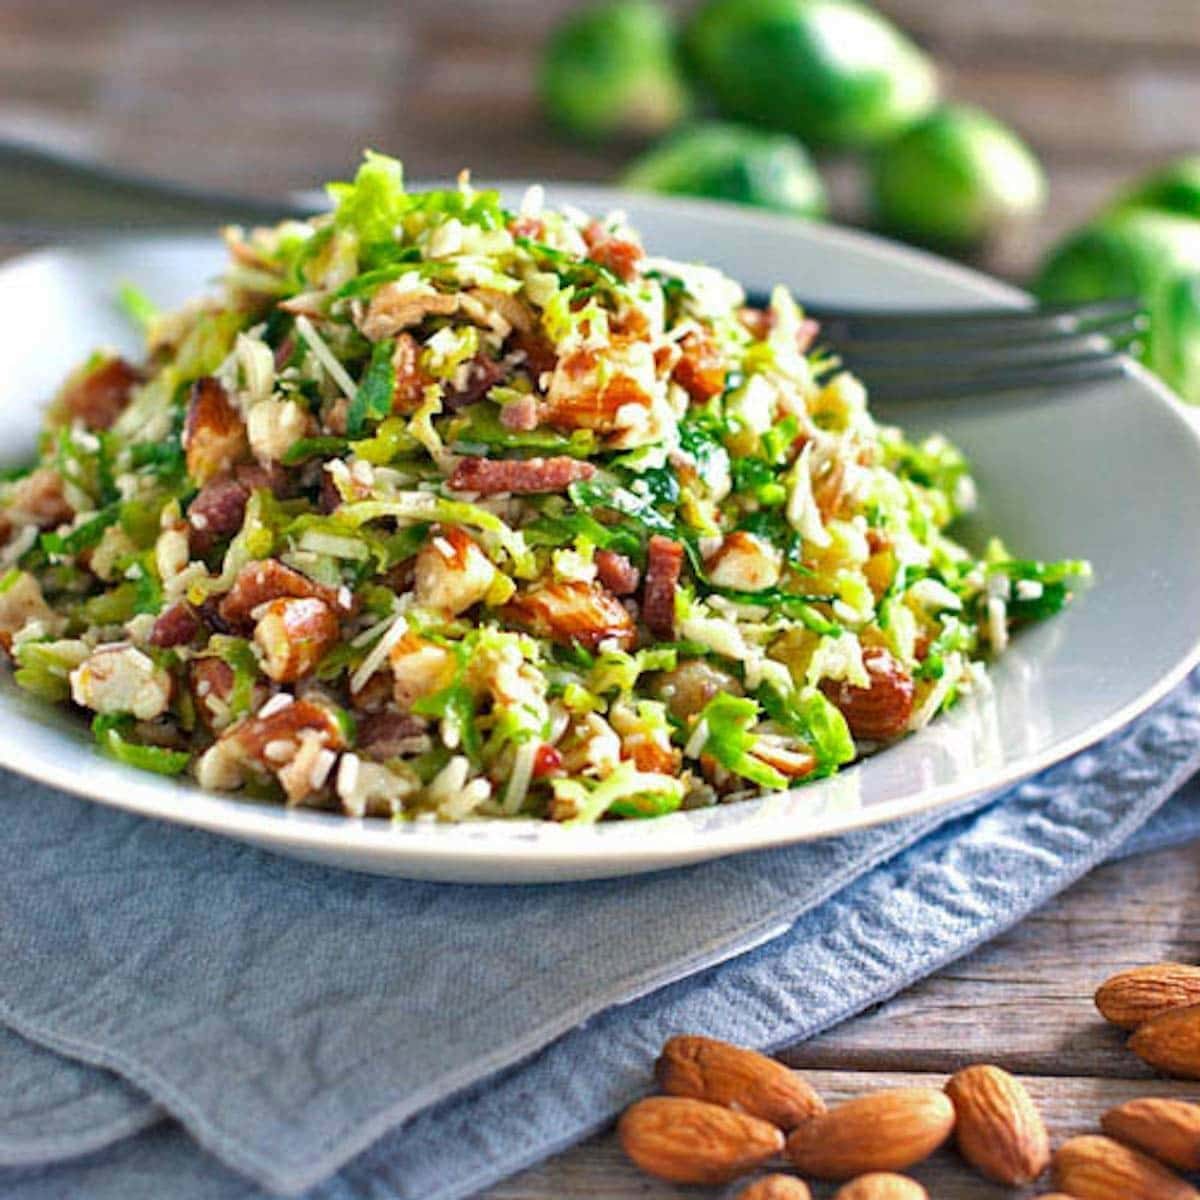 Bacon and brussels sprout salad with crumbled bacon, parmesan cheese and almonds served on a plate. 